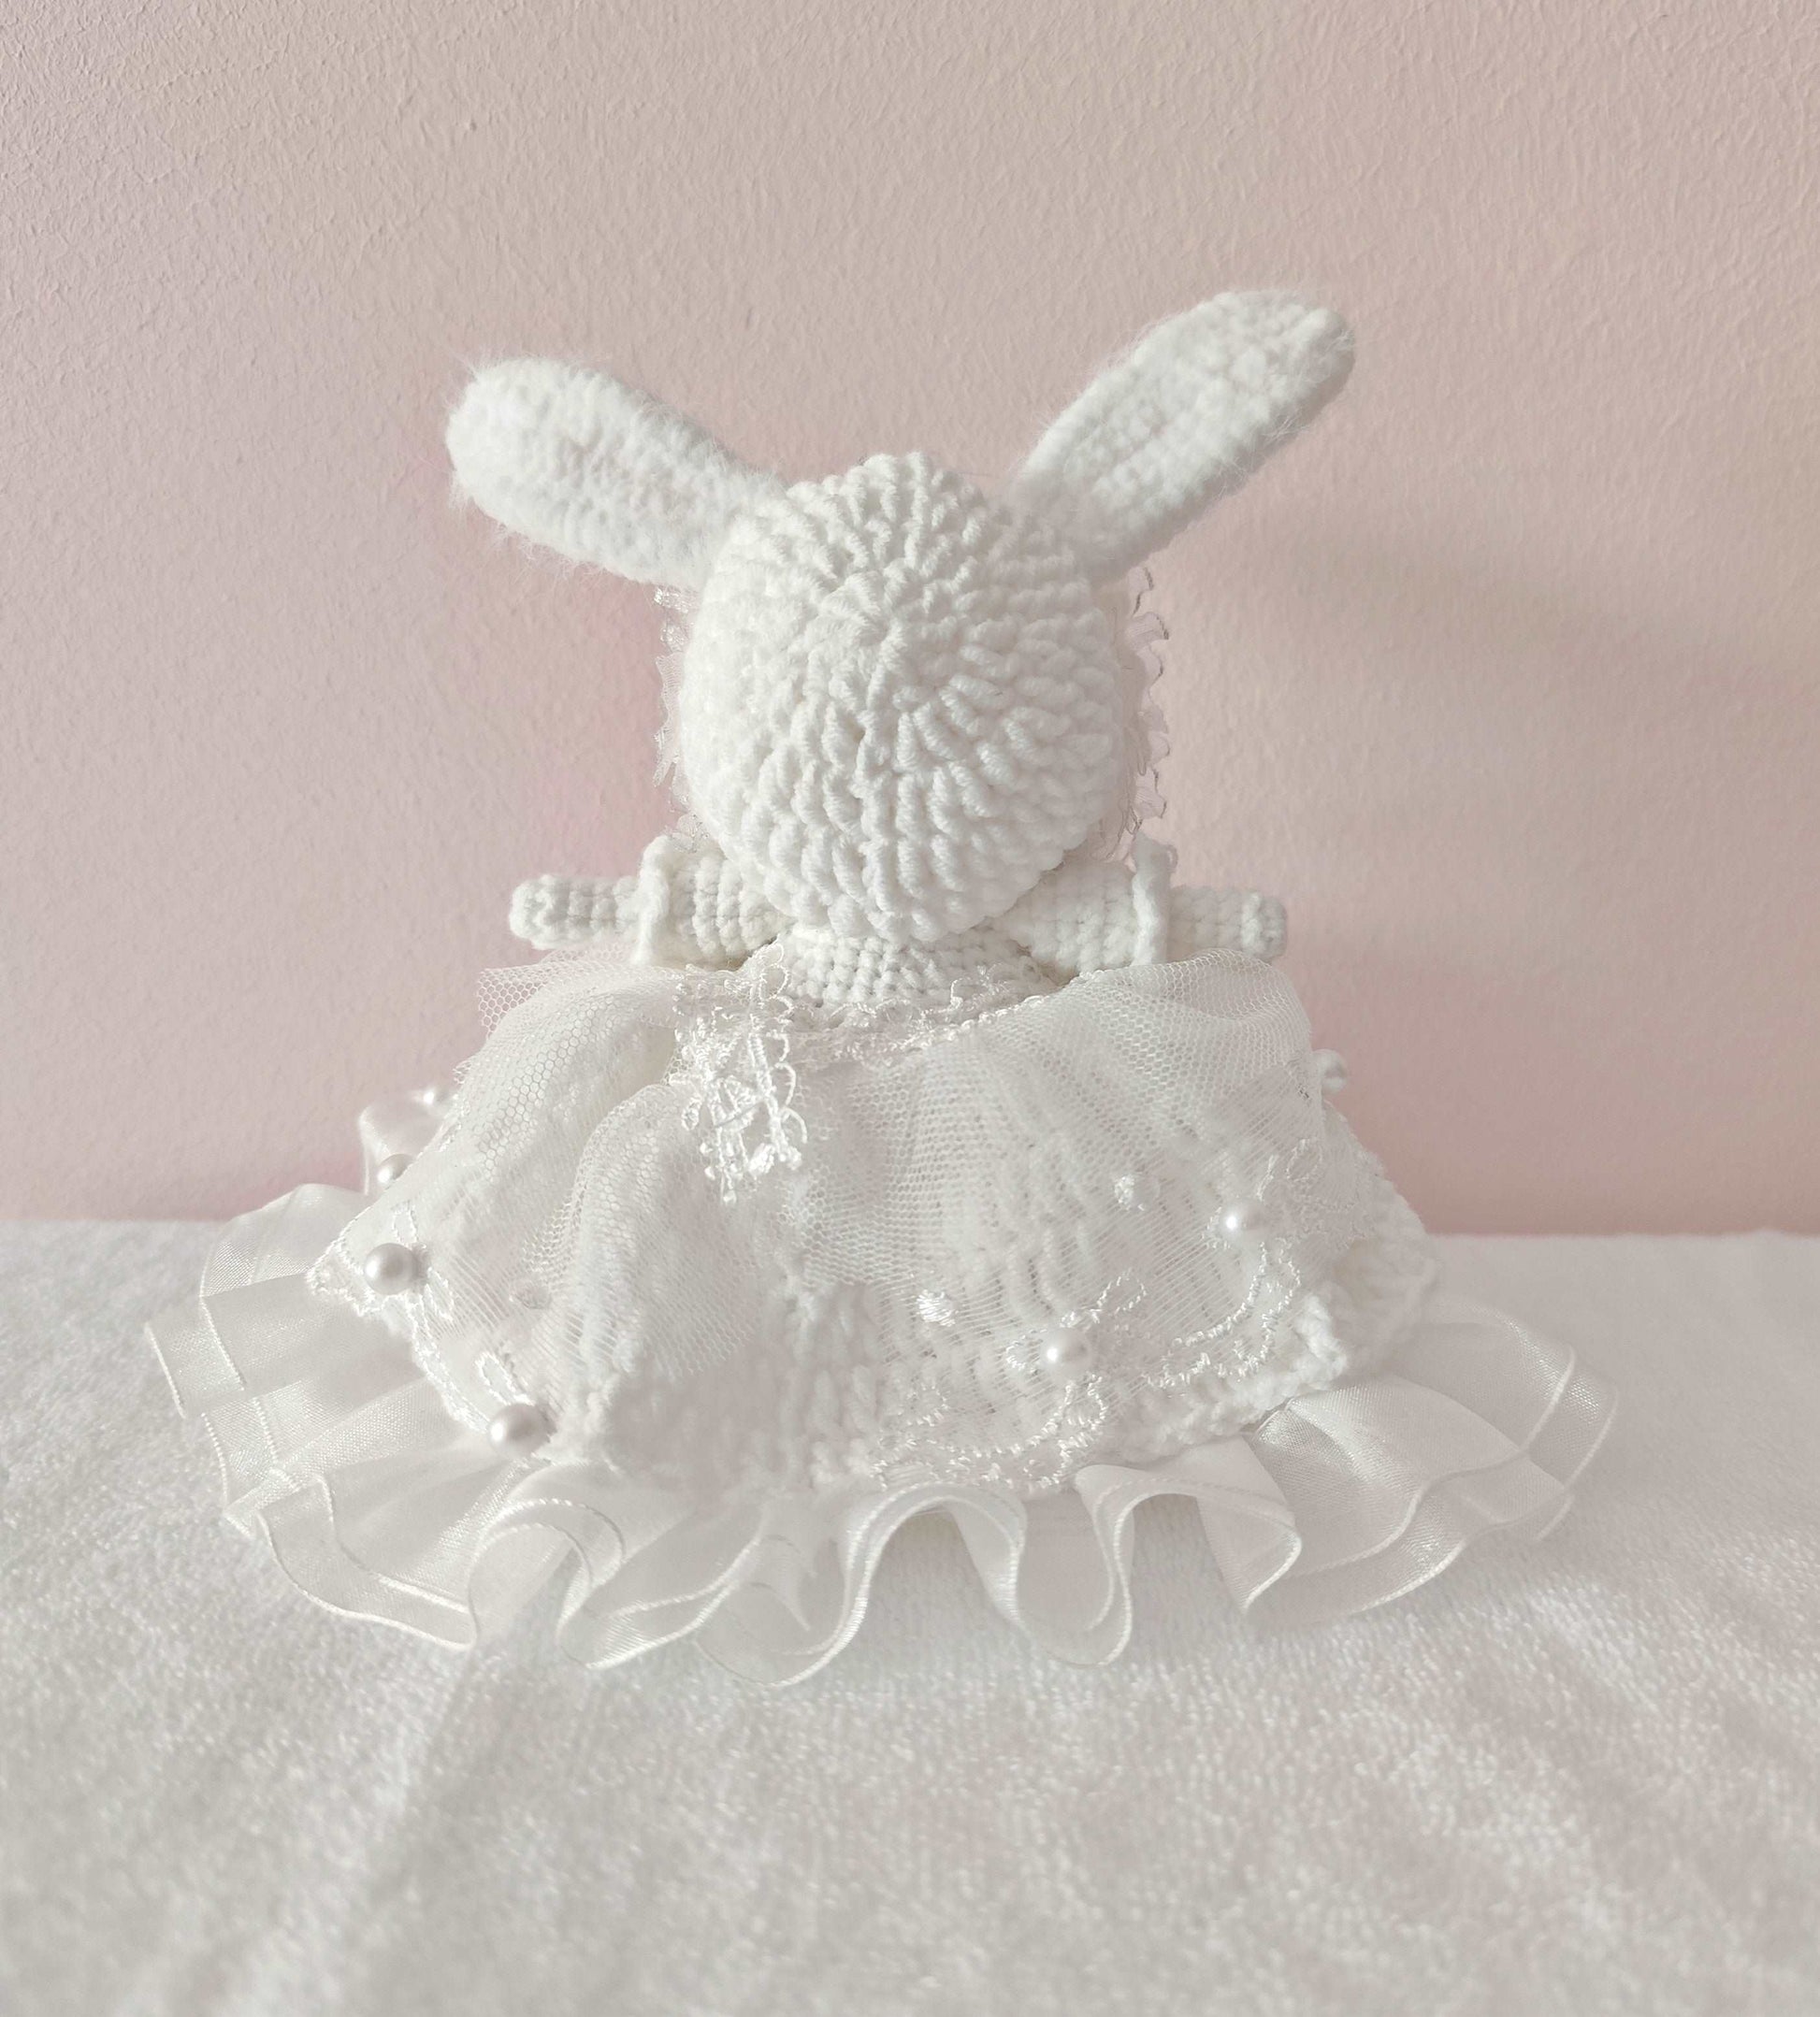 Handcrafted Bunny Doll Decoration for Nursery